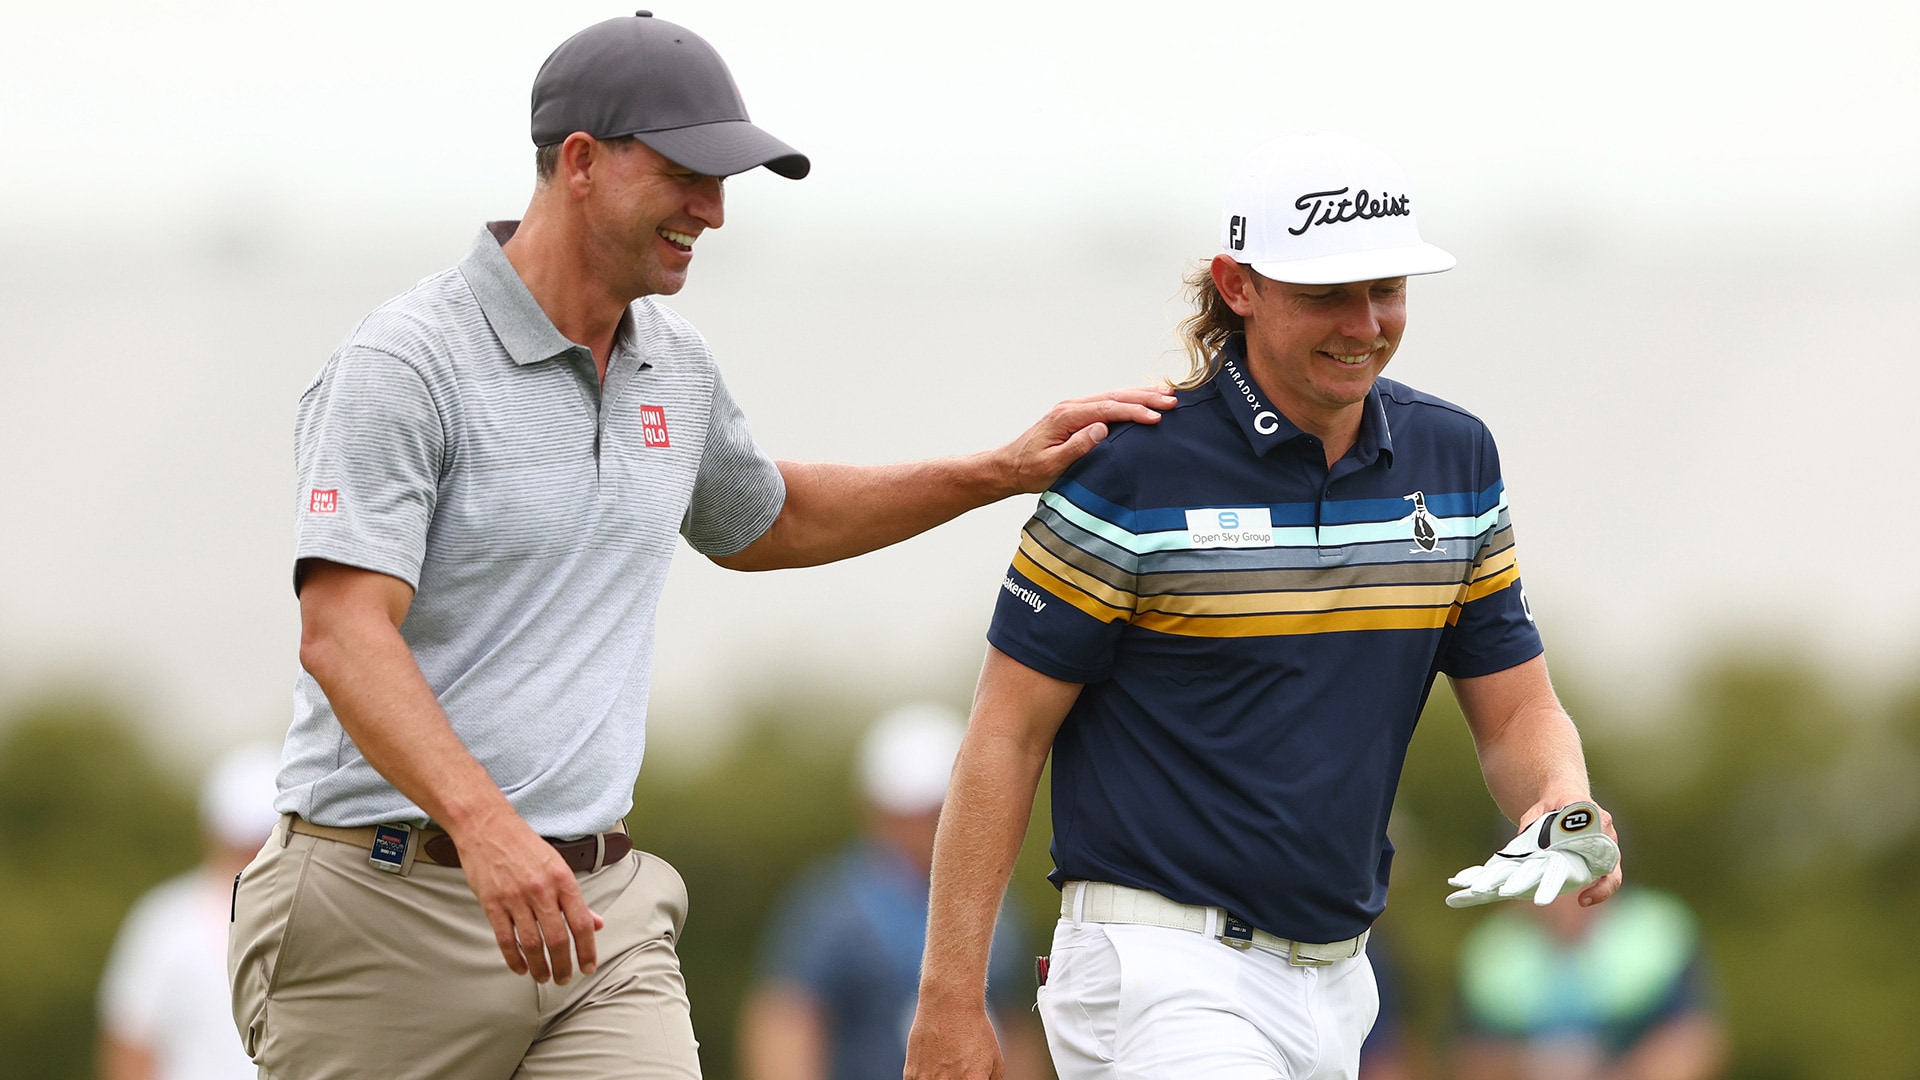 After scramble to find clubs, Adam Scott one back at Aussie PGA; Cam Smith 3 back